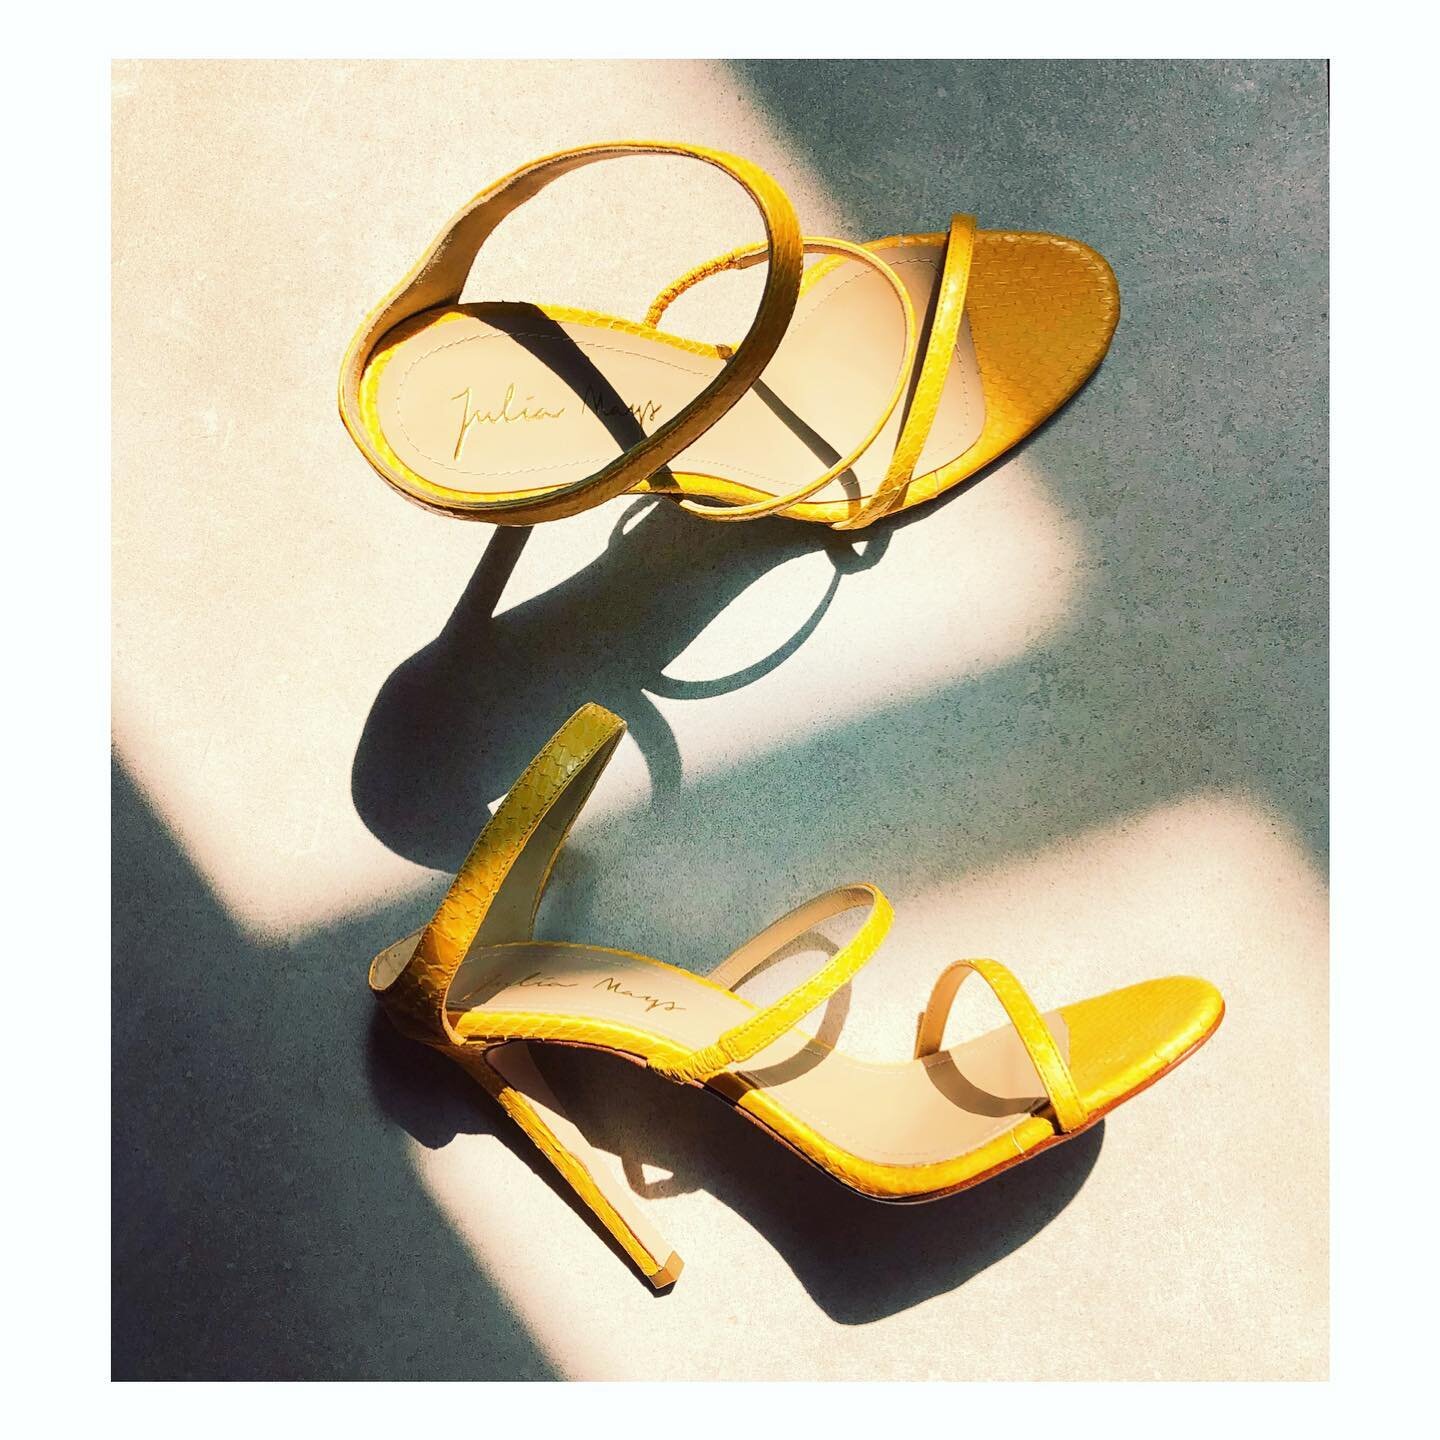 On our way to sunshine ☀️ #cocomules #yellow #shoelove #juliamays